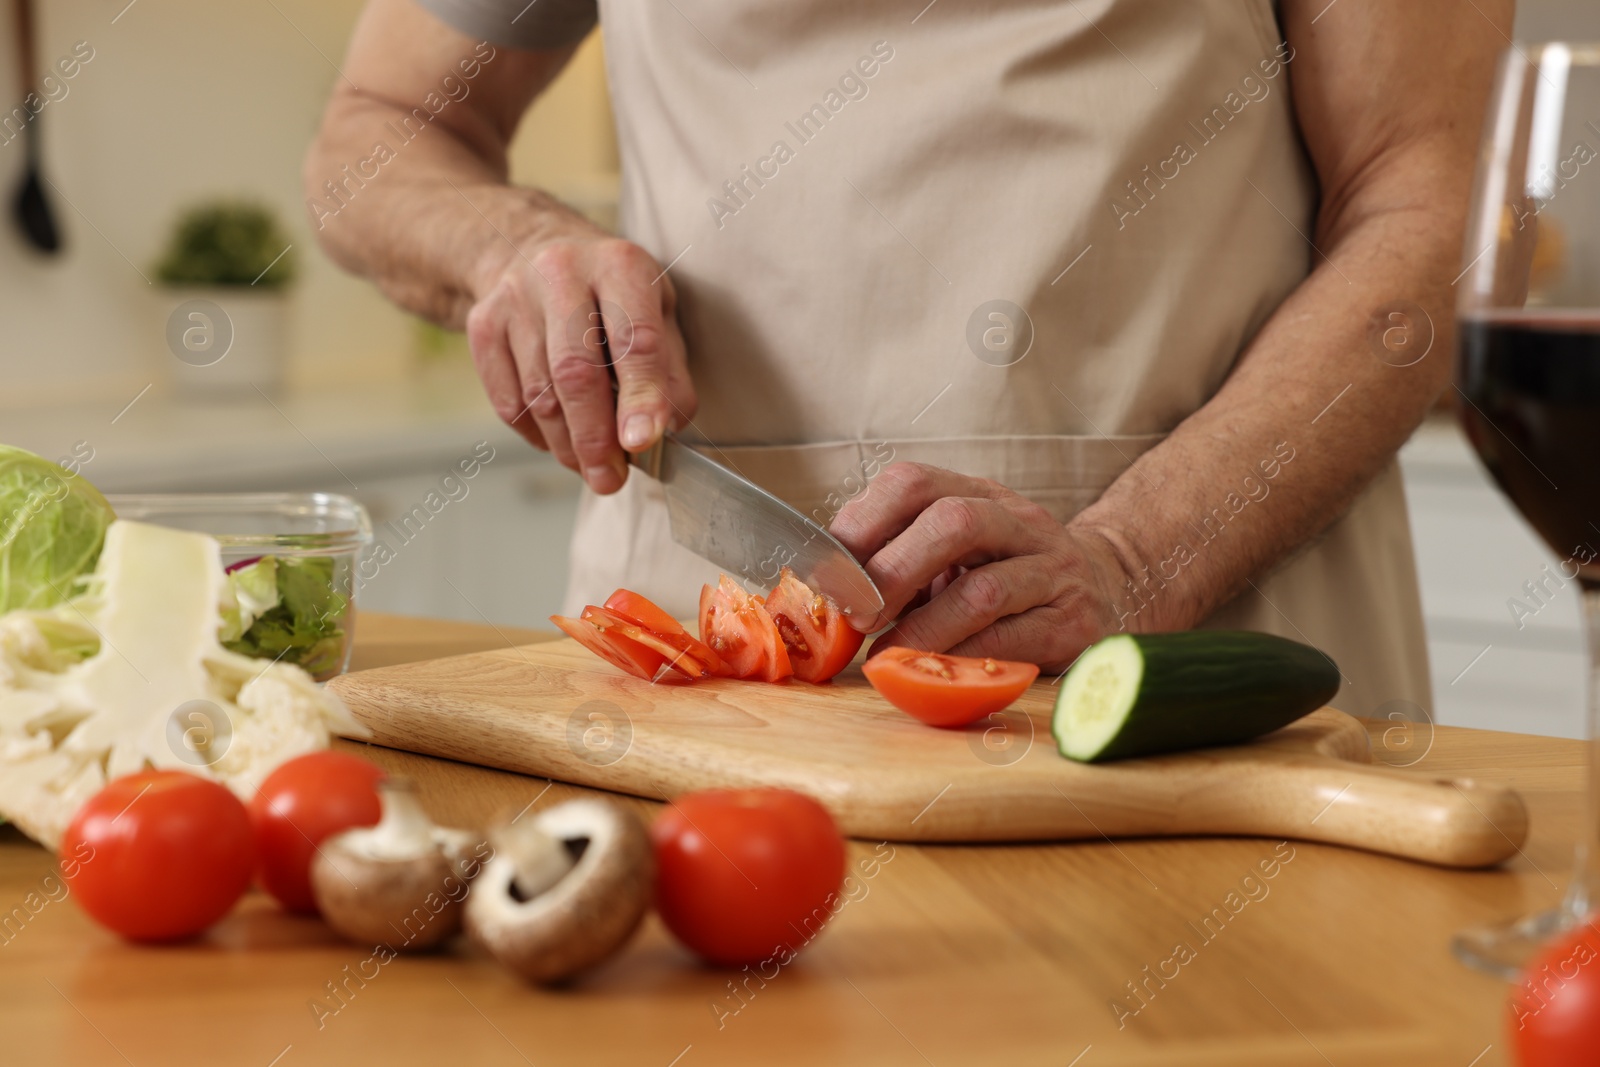 Photo of Man cutting tomato at wooden table in kitchen, closeup